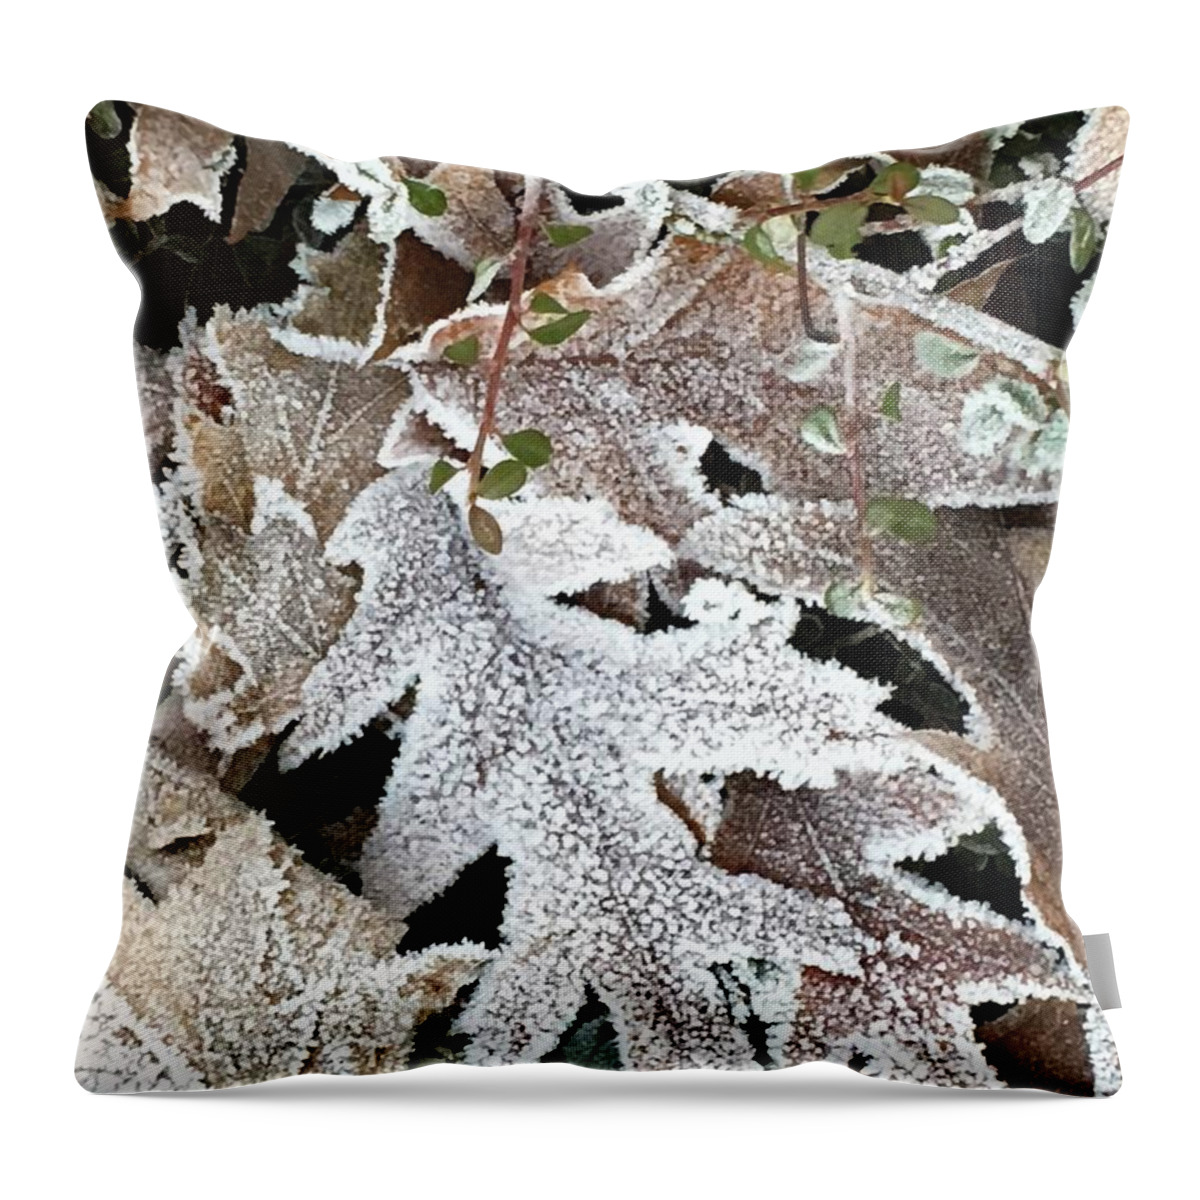 Pin Oak Throw Pillow featuring the photograph Pin Oak Leaves 2 by Kathryn Alexander MA